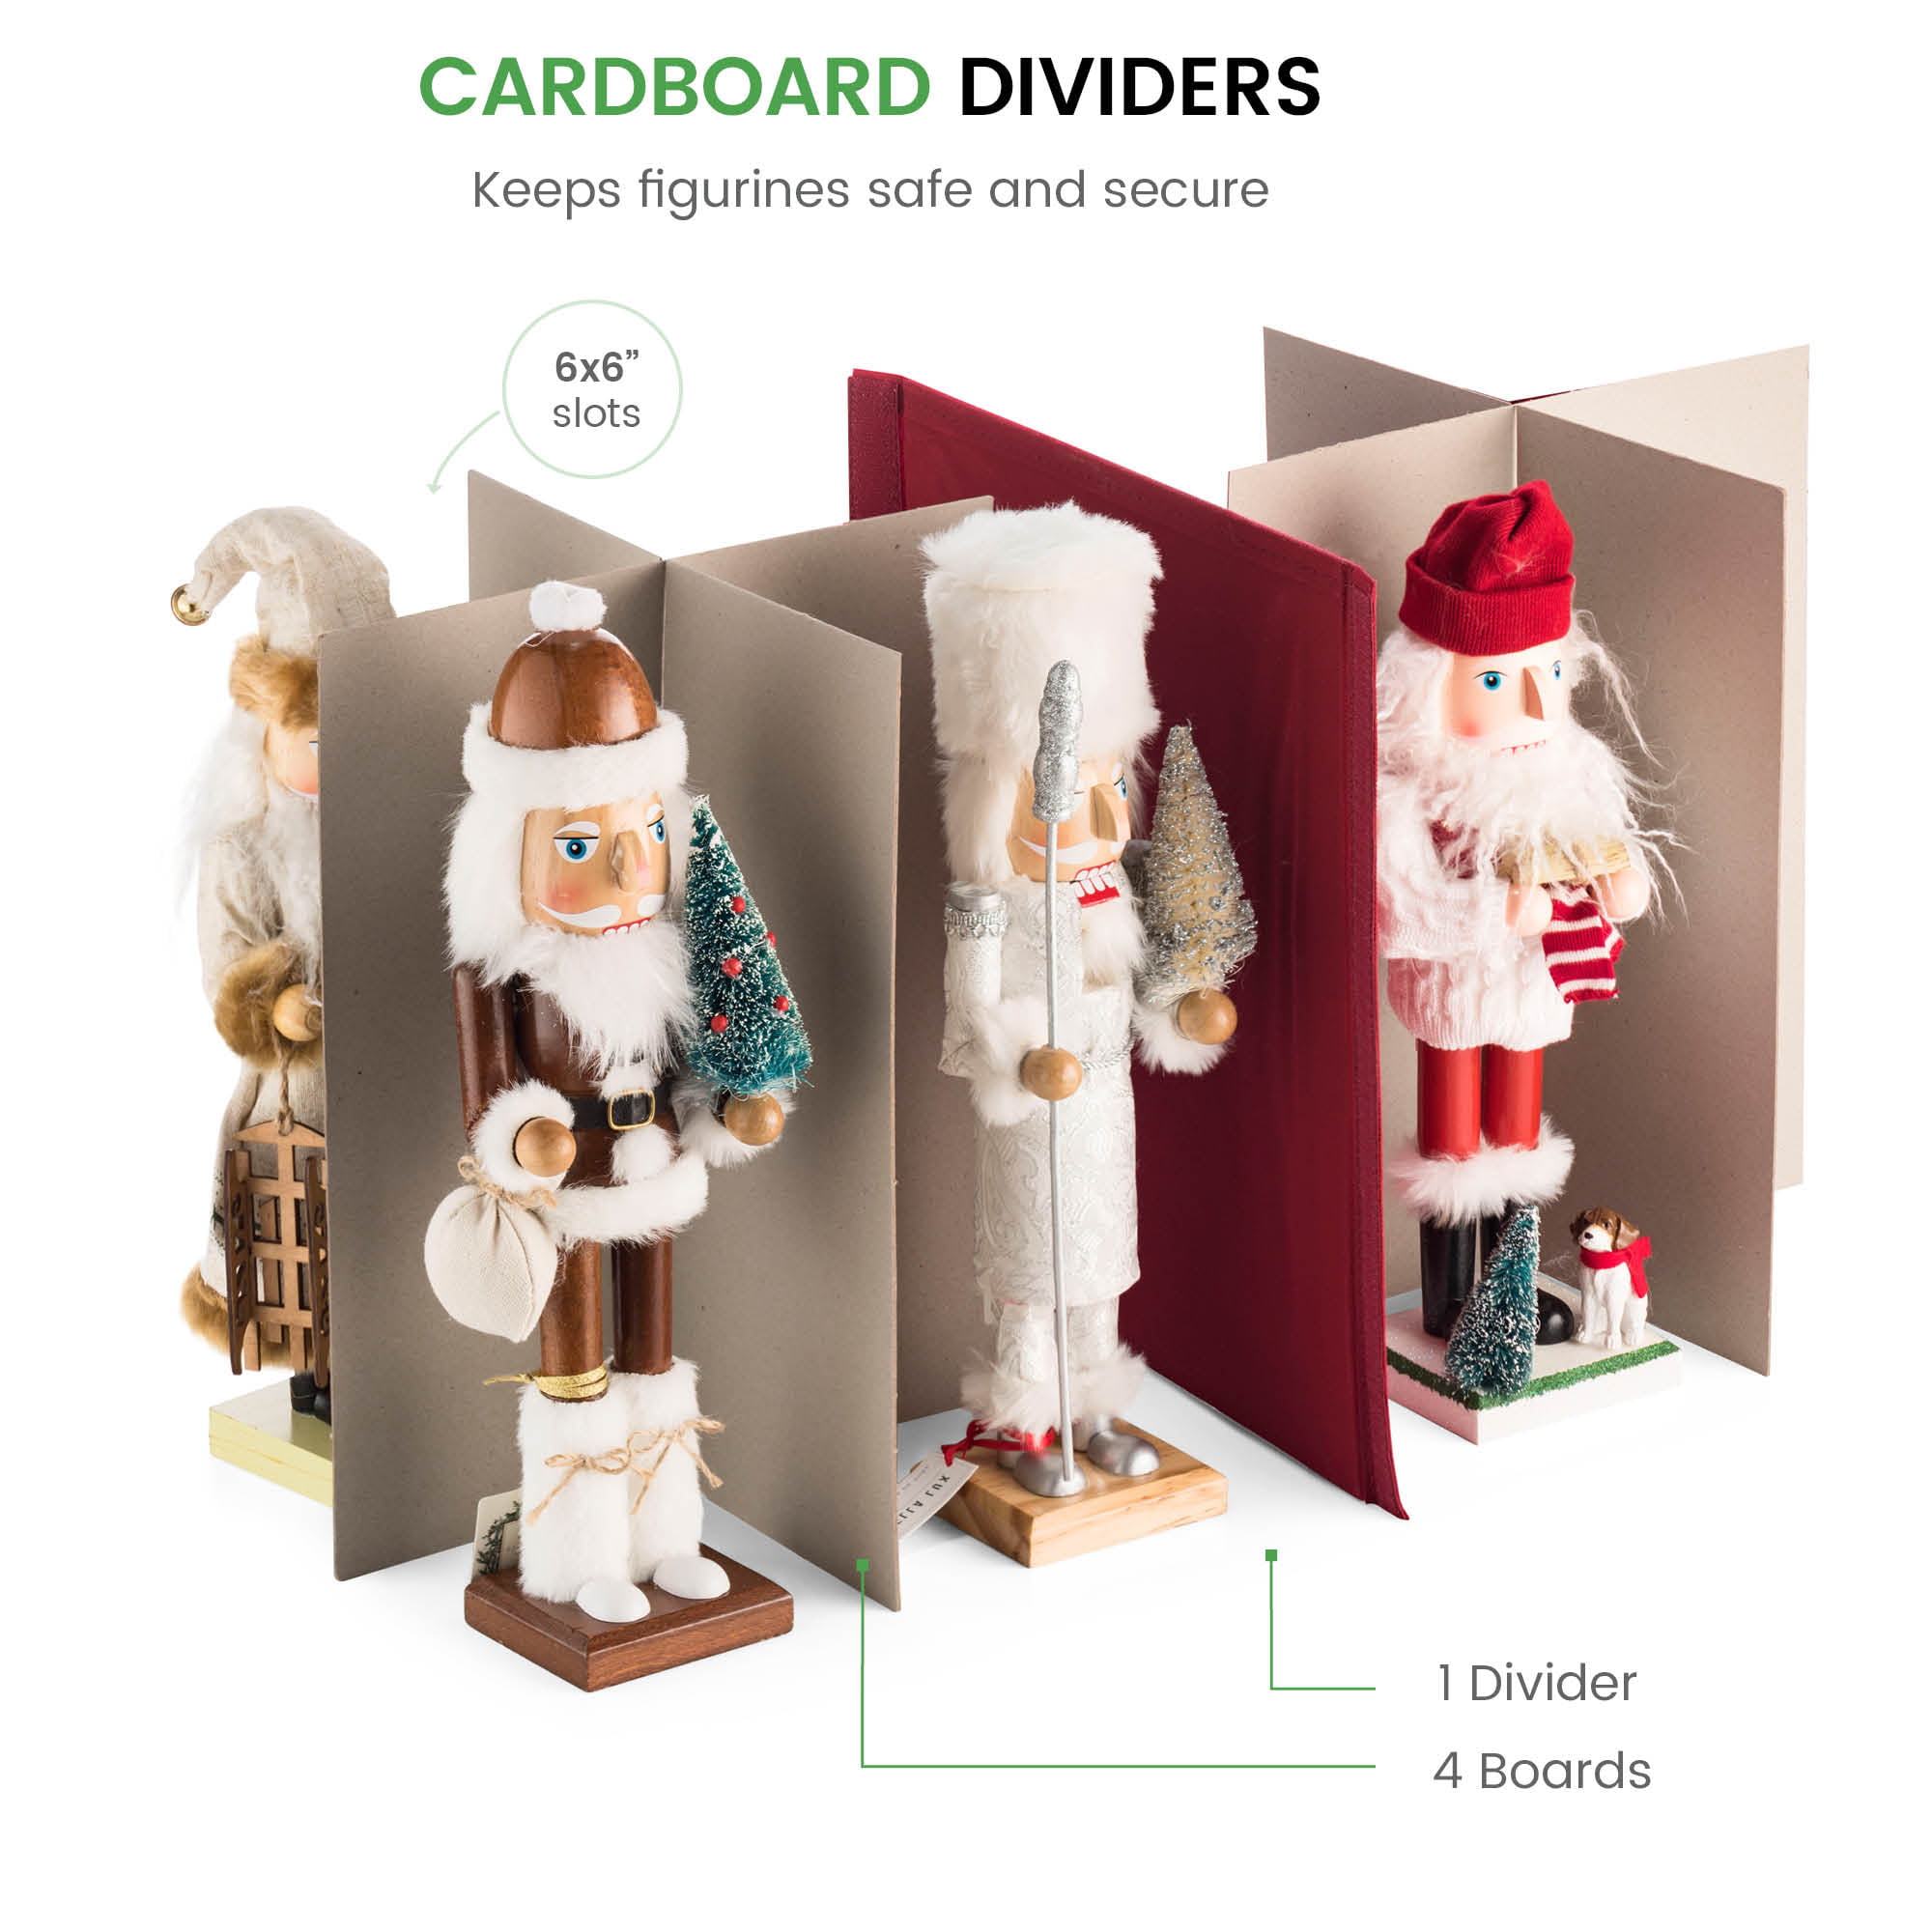 Protect /& Keeps Safe Up to 8 Christmas Figurines 15-Inch /& Xmas Decorations Accessories Christmas Figurine Storage Box with Zippered Closure Durable Non-Woven Ornament Storage Container,Two Handles